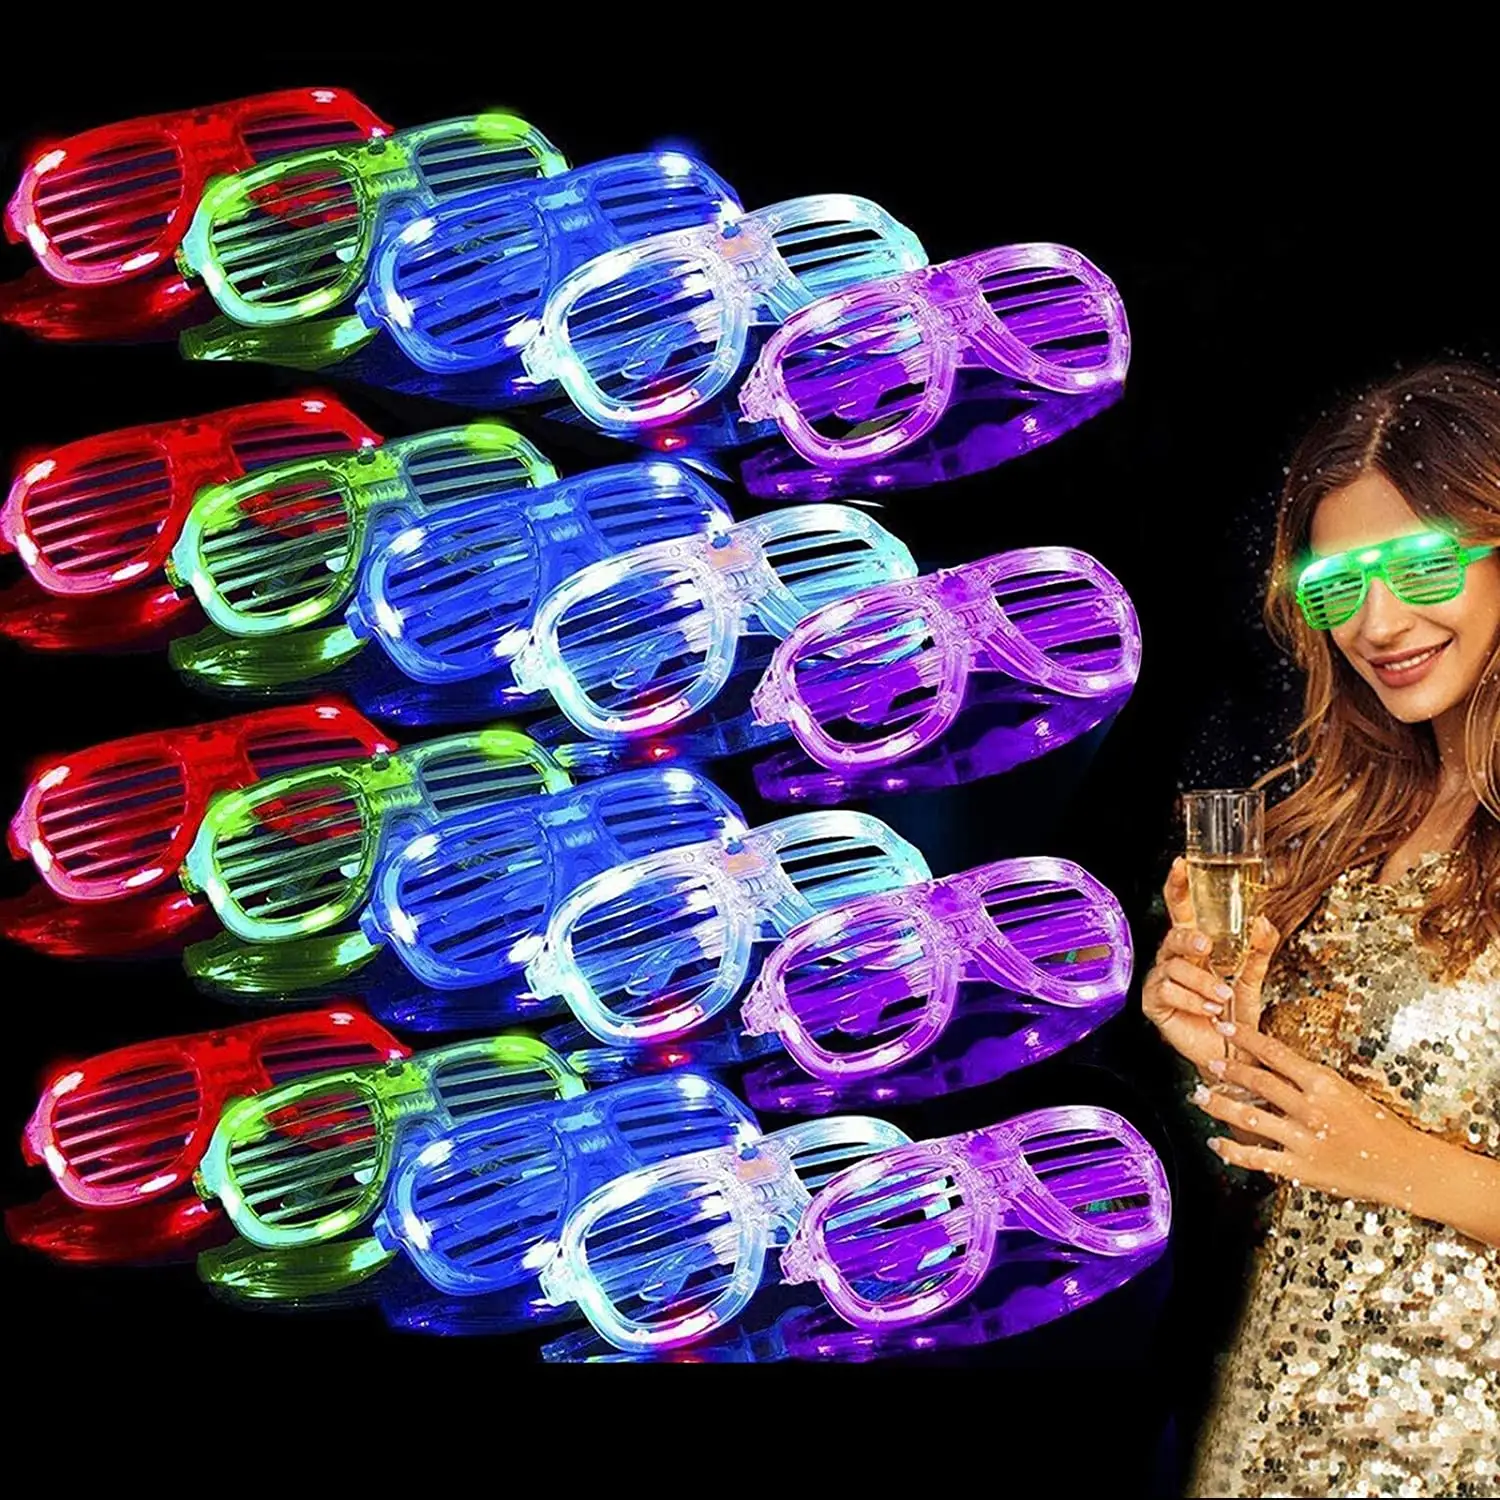 Hot Sale Glow In The Dark Party Supplies Light Up Led Luminous Toy Color Led Shutter Glow Glasses Party Led Eye Glasses